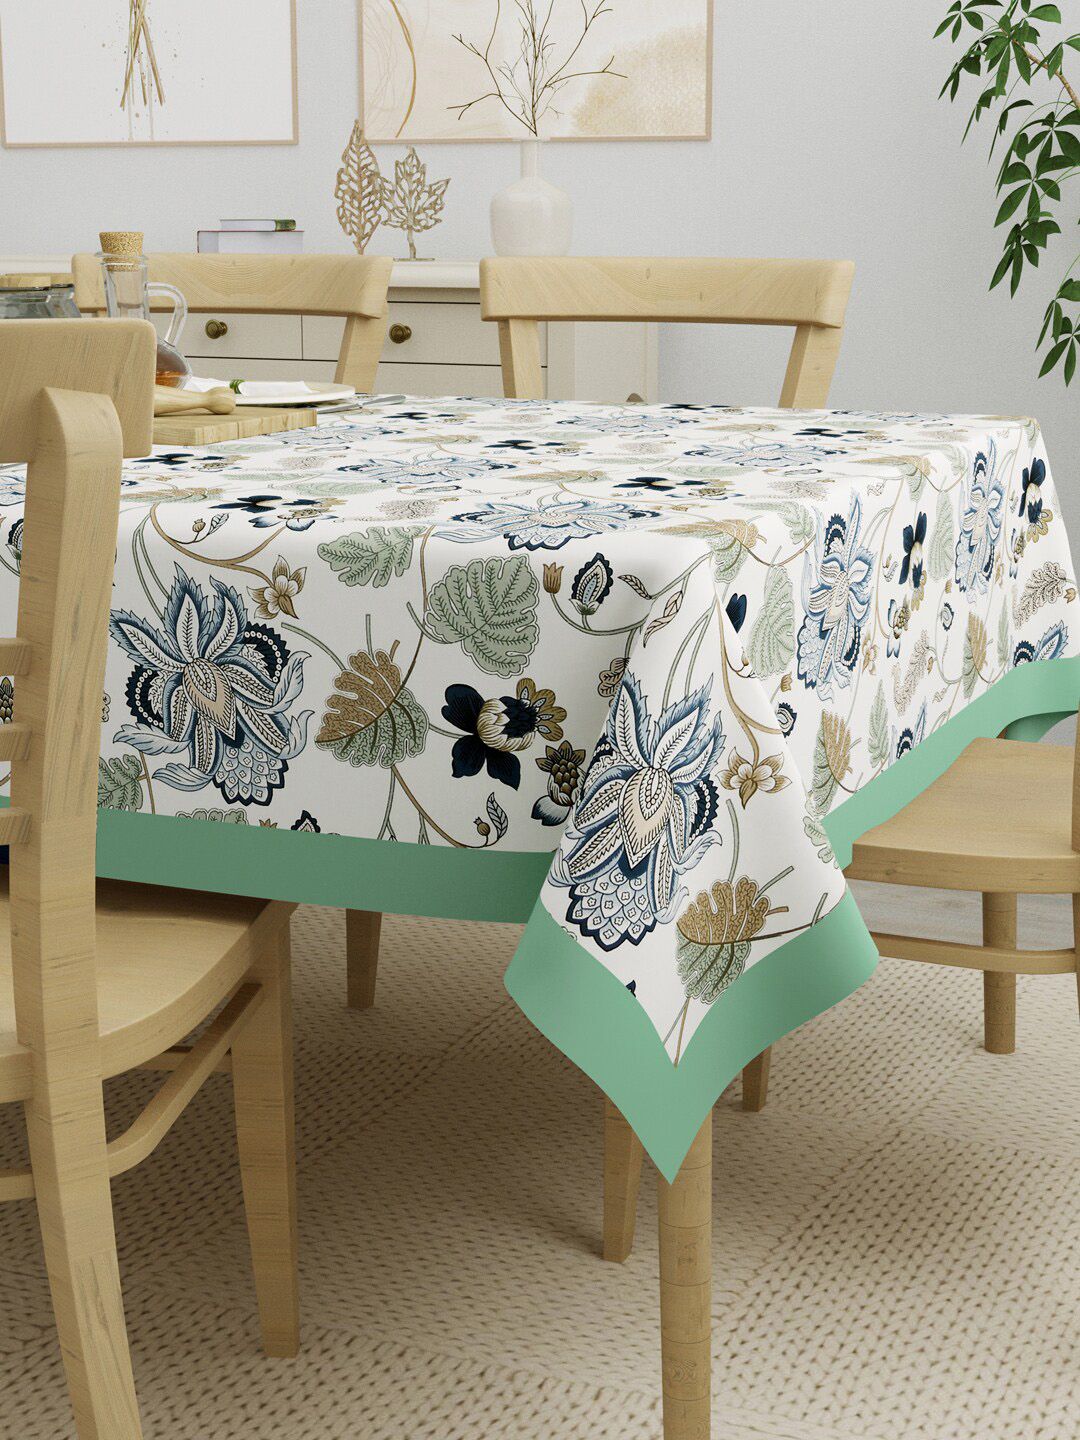 Clasiko  Green & White Printed Cotton Table Covers Price in India